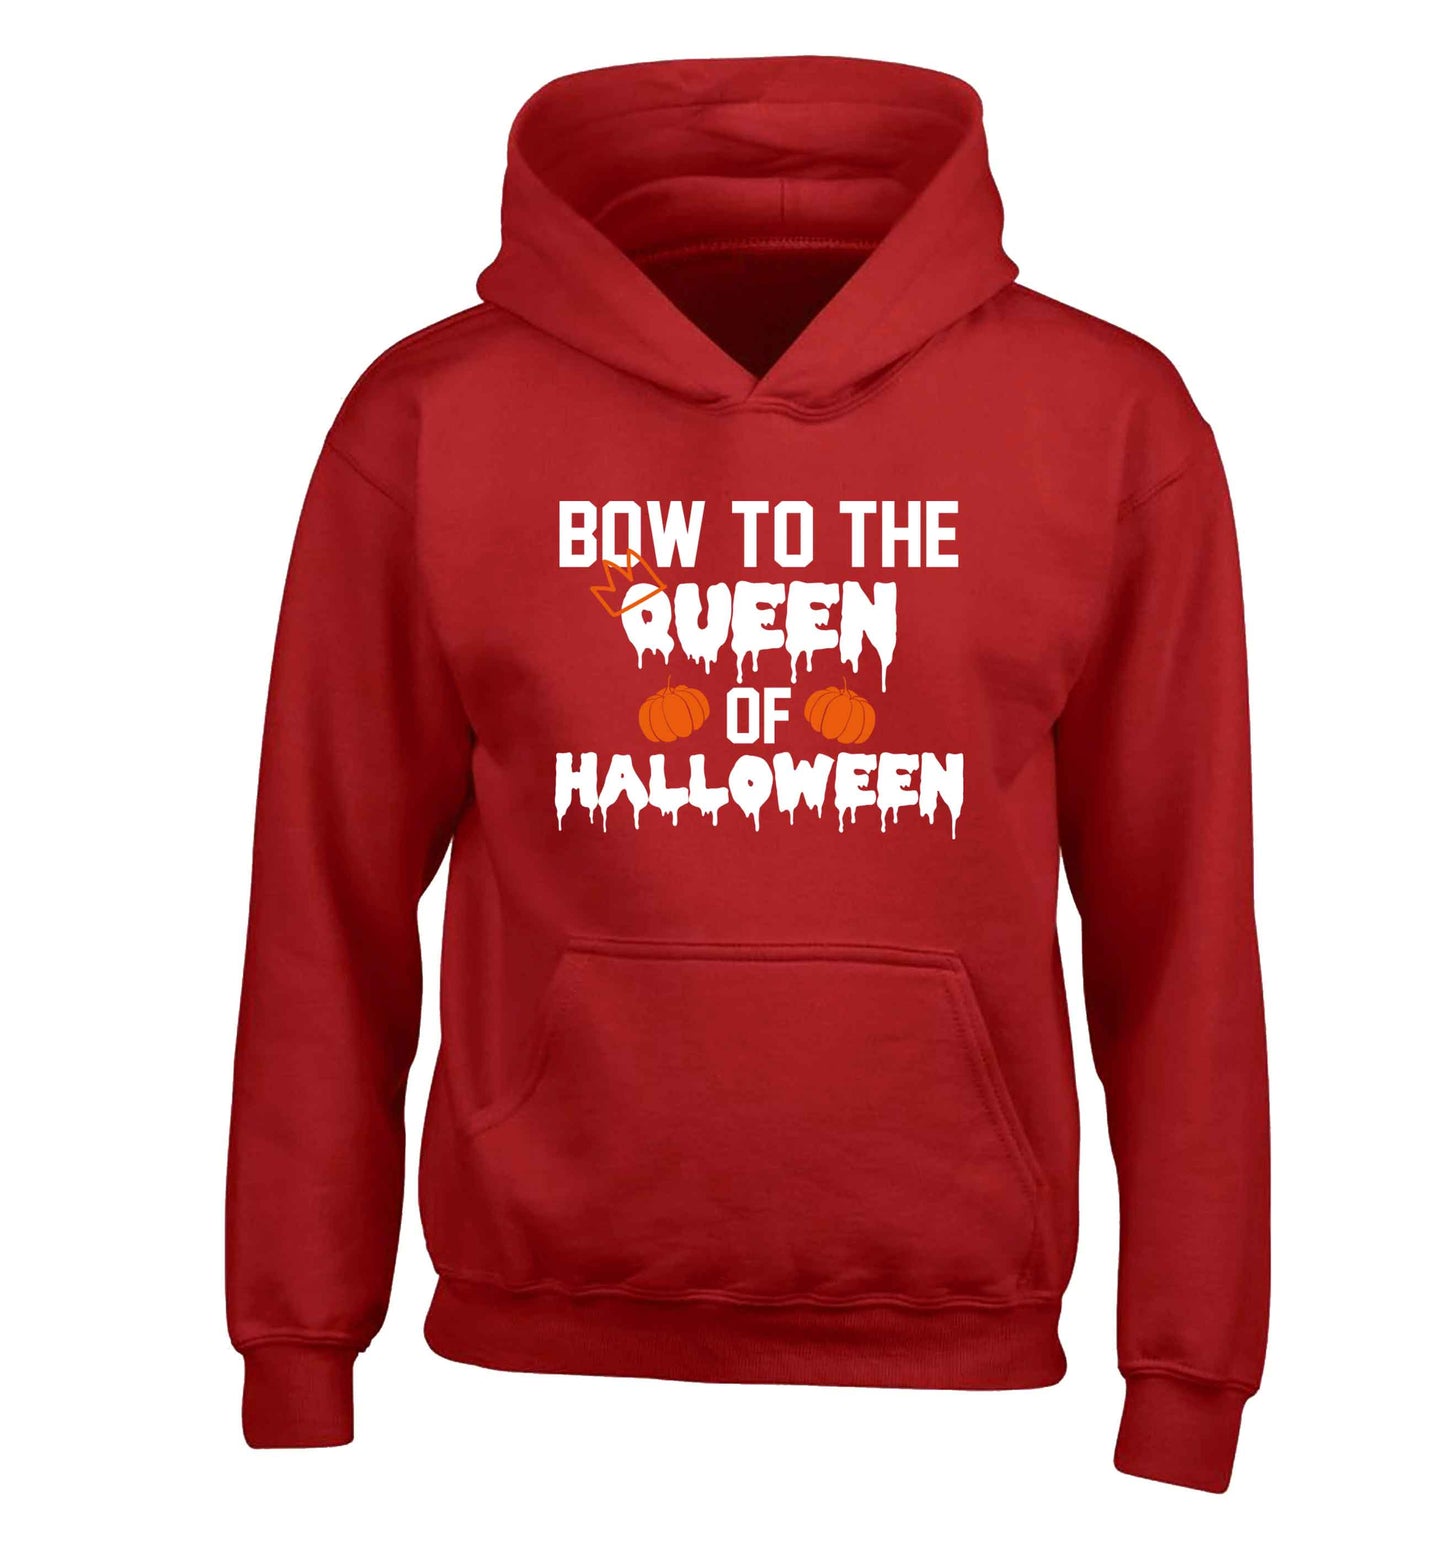 Bow to the Queen of halloween children's red hoodie 12-13 Years